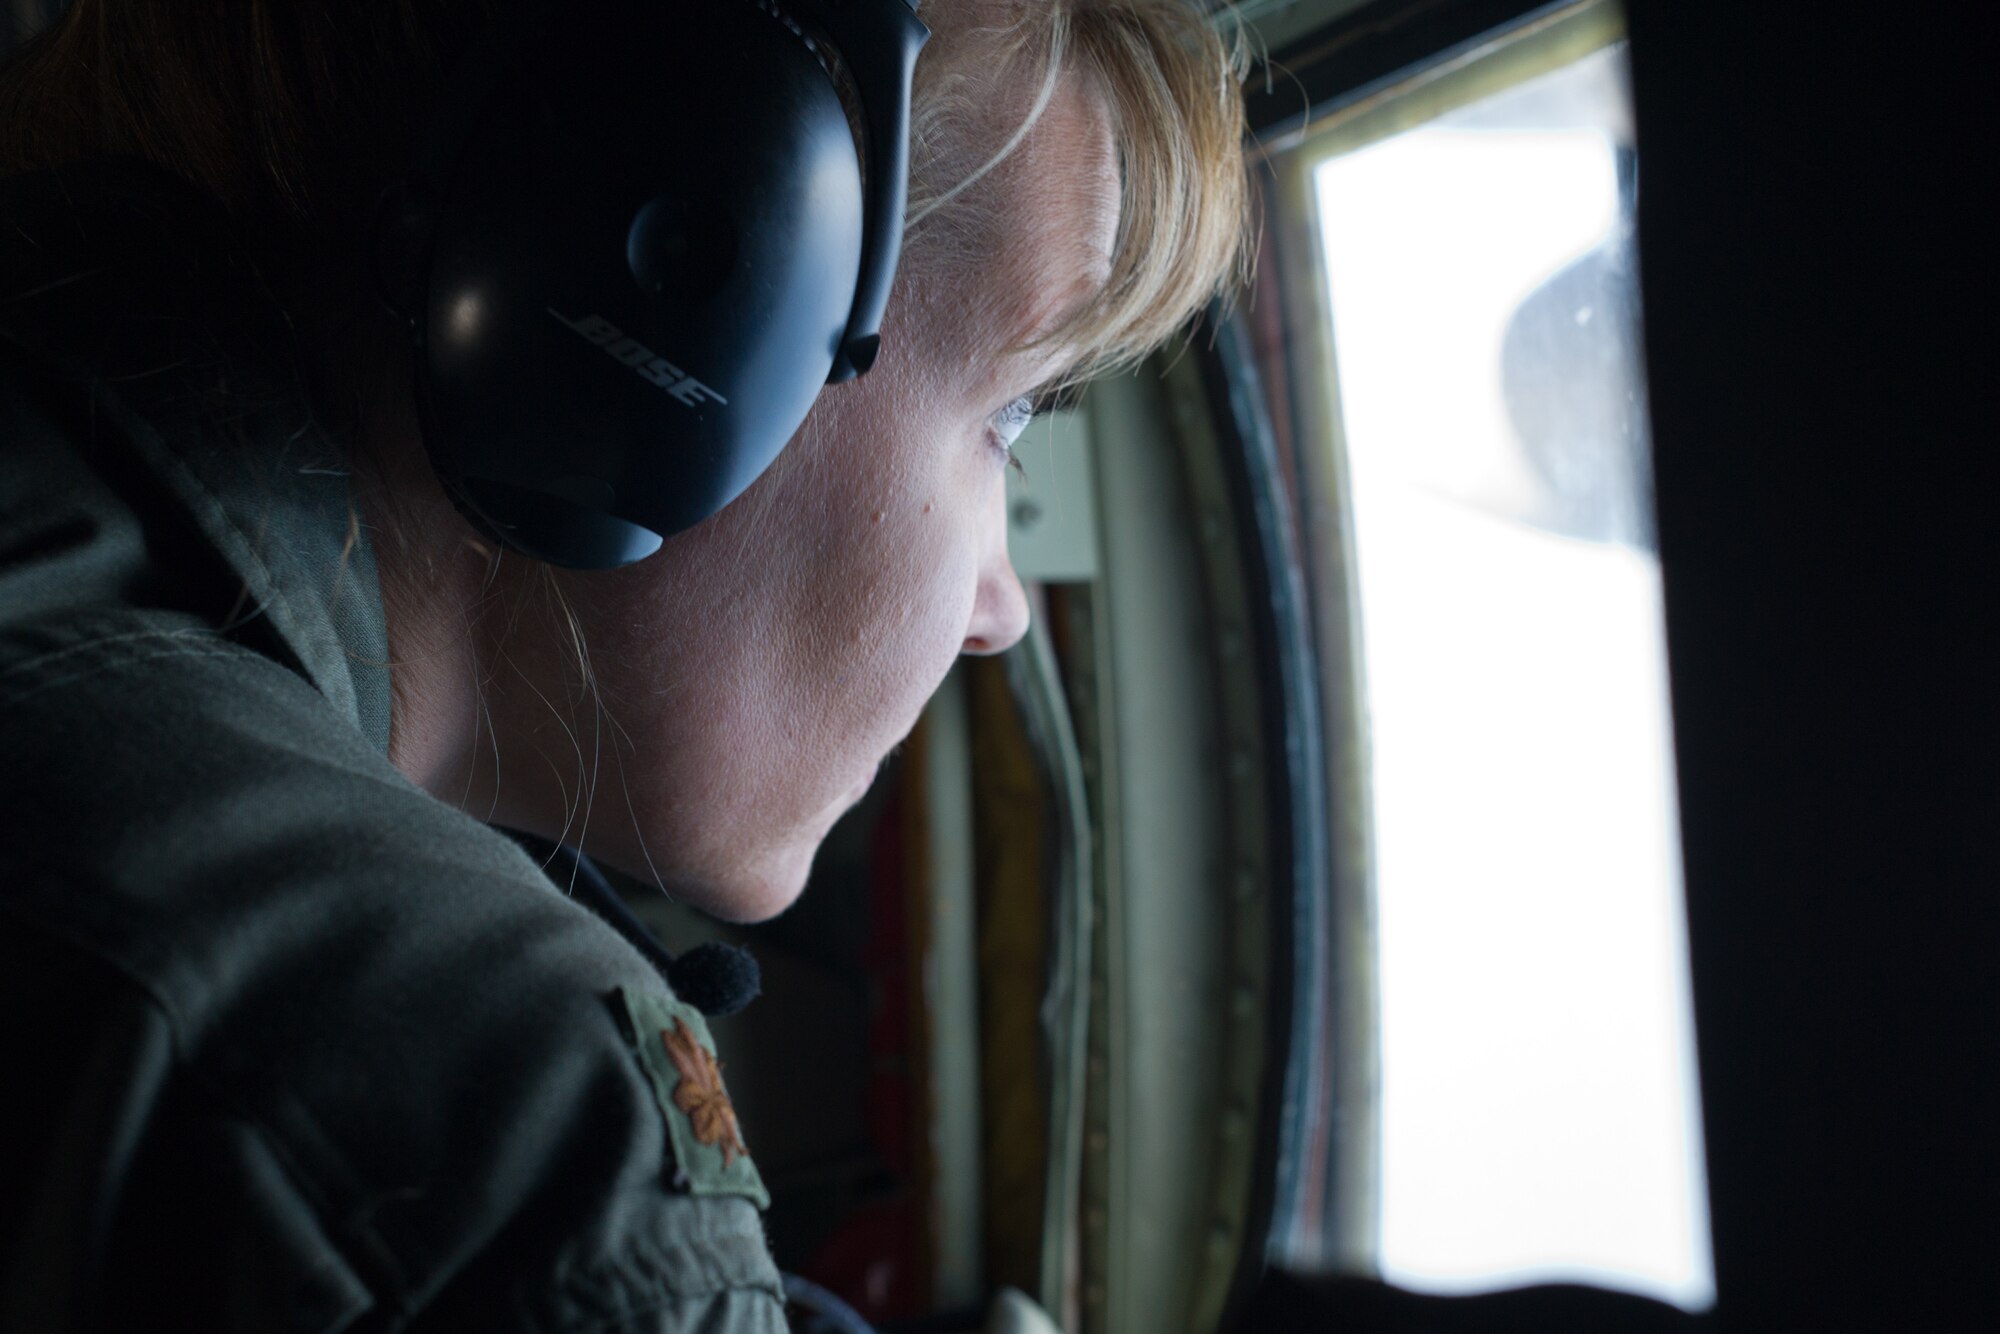 Air Force Reserve Maj. Nicole Mitchell, aerial reconnaissance weather officer, 53rd Weather Reconnaissance Squadron, Keesler Air Force Base, Mississippi, looks out her observation window while flying into Hurricane Irma Sep. 8, 2017. The Air Force Reserve 53rd Weather Reconnaissance Squadron "Hurricane Hunters" fly WC-130J Super Hercules though the eye of active hurricanes to collect weather data using aircraft and externally dropped sensors to  provide accurate weather data to the National Hurricane Center on approaching hurricanes. The Reserve Citizen Airmen provide 100 percent of the Air Force capability in low-level, real time data collection in Atlantic and Pacific Ocean tropical weather systems. (U.S. Air Force photo by Staff Kyle Brasier)